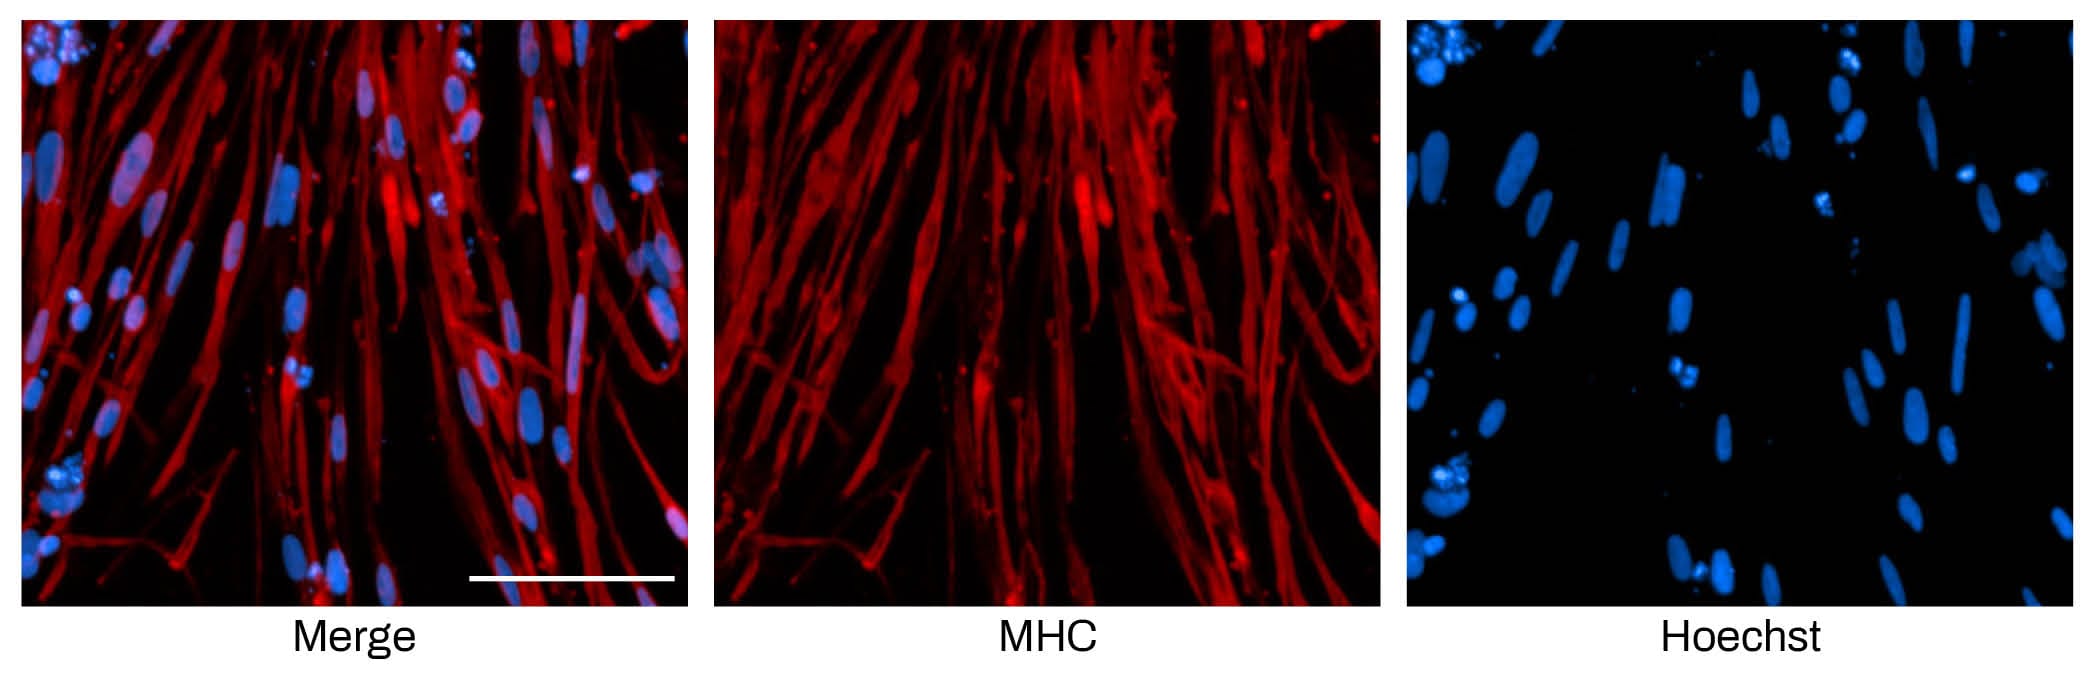 Immunofluorescent staining of Skeletal - mRNA cell cultures on day 6 post-differentiation